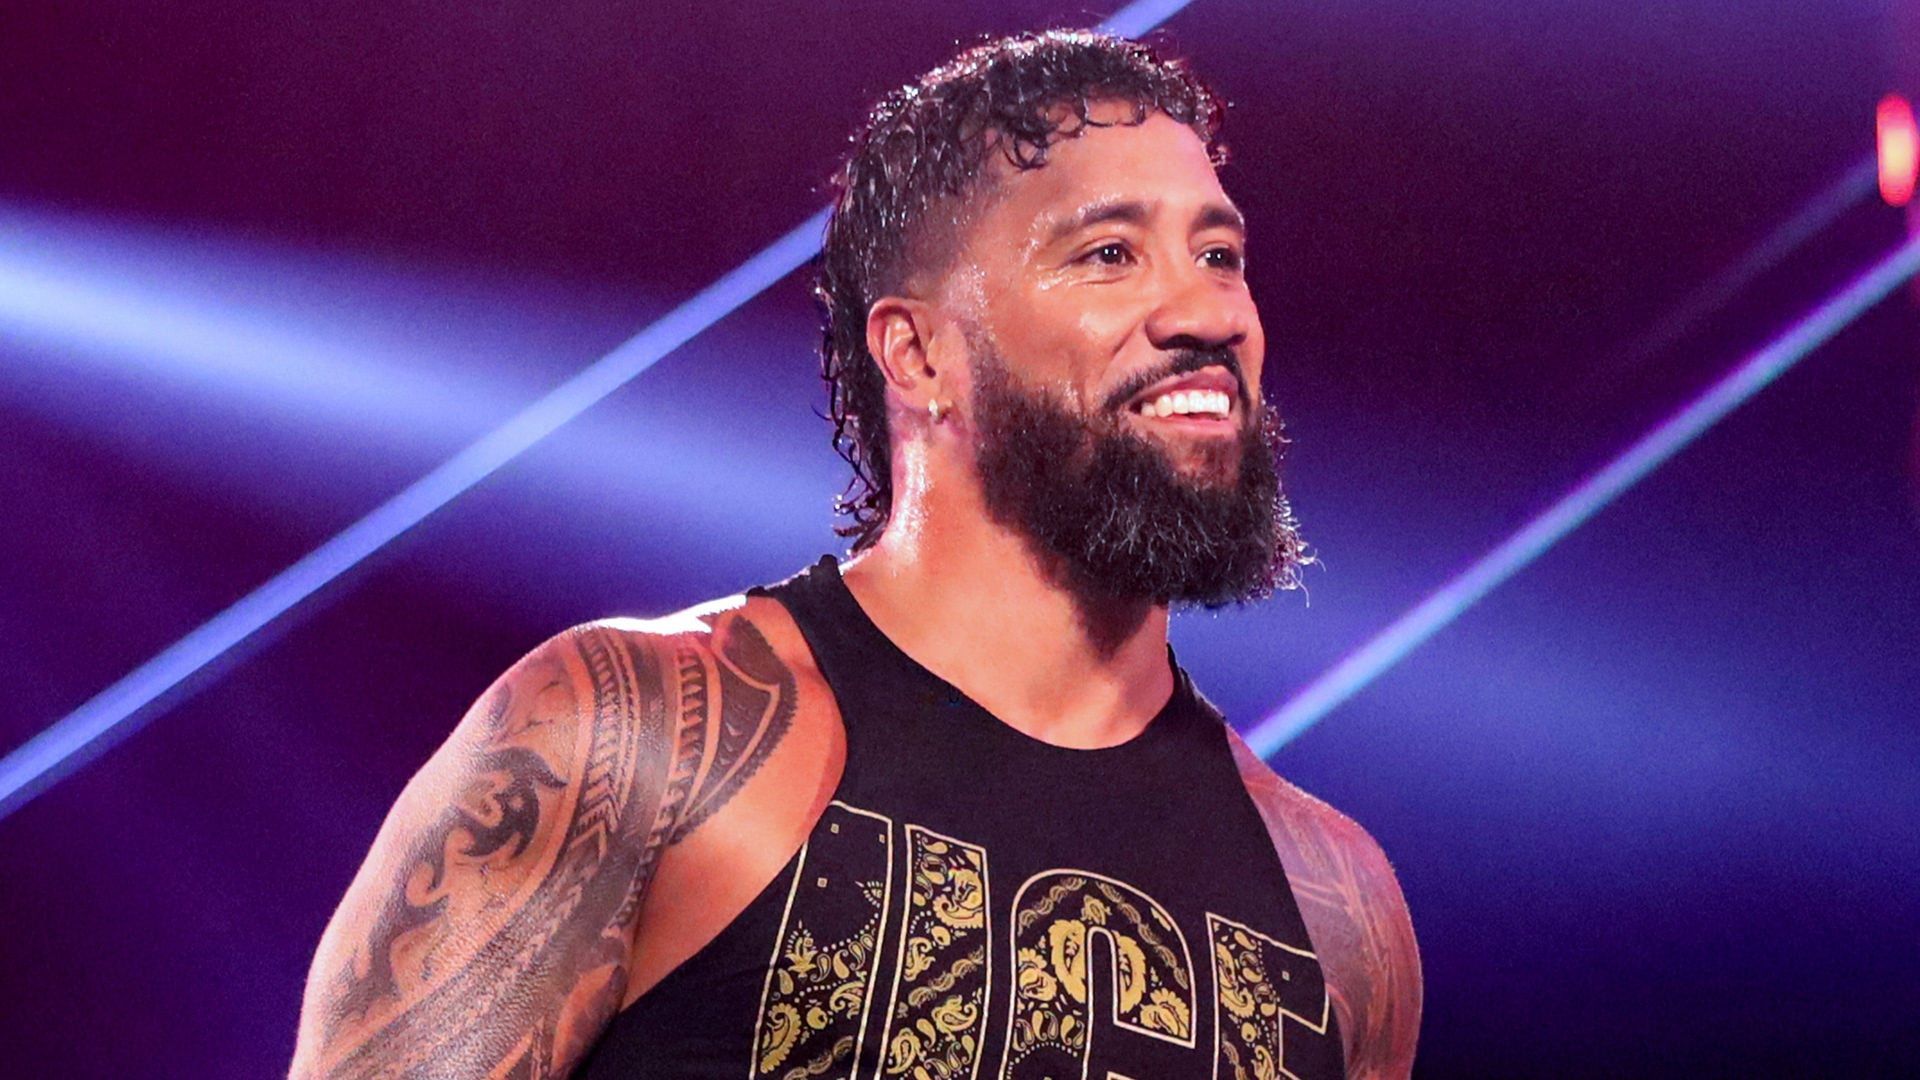 Jey Uso will be in action at WWE SummerSlam!